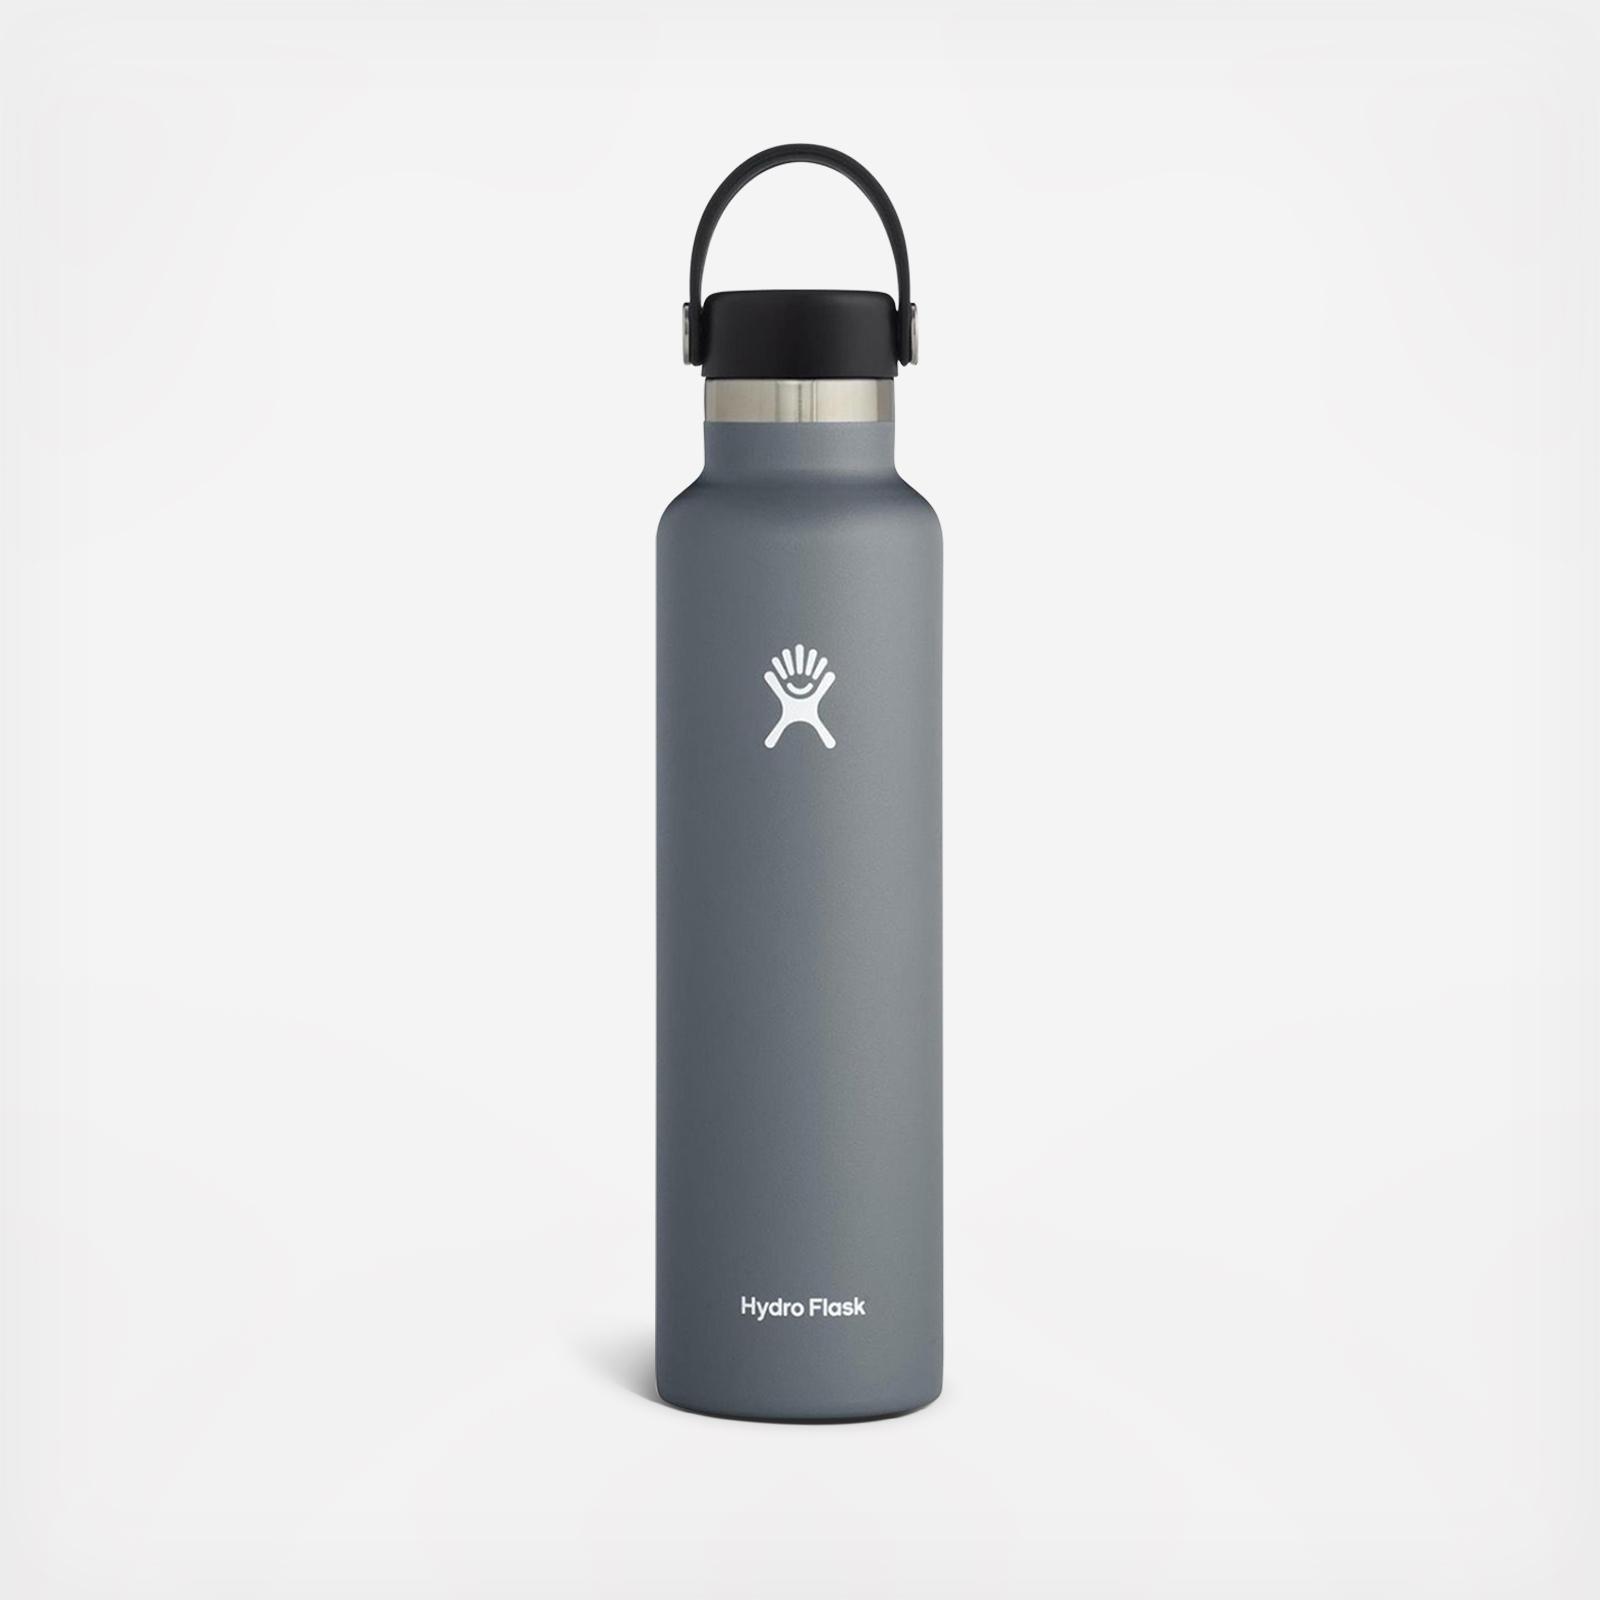 Hydro Flask, Accessories, Hydro Flask 8oz Vacuum Insulated